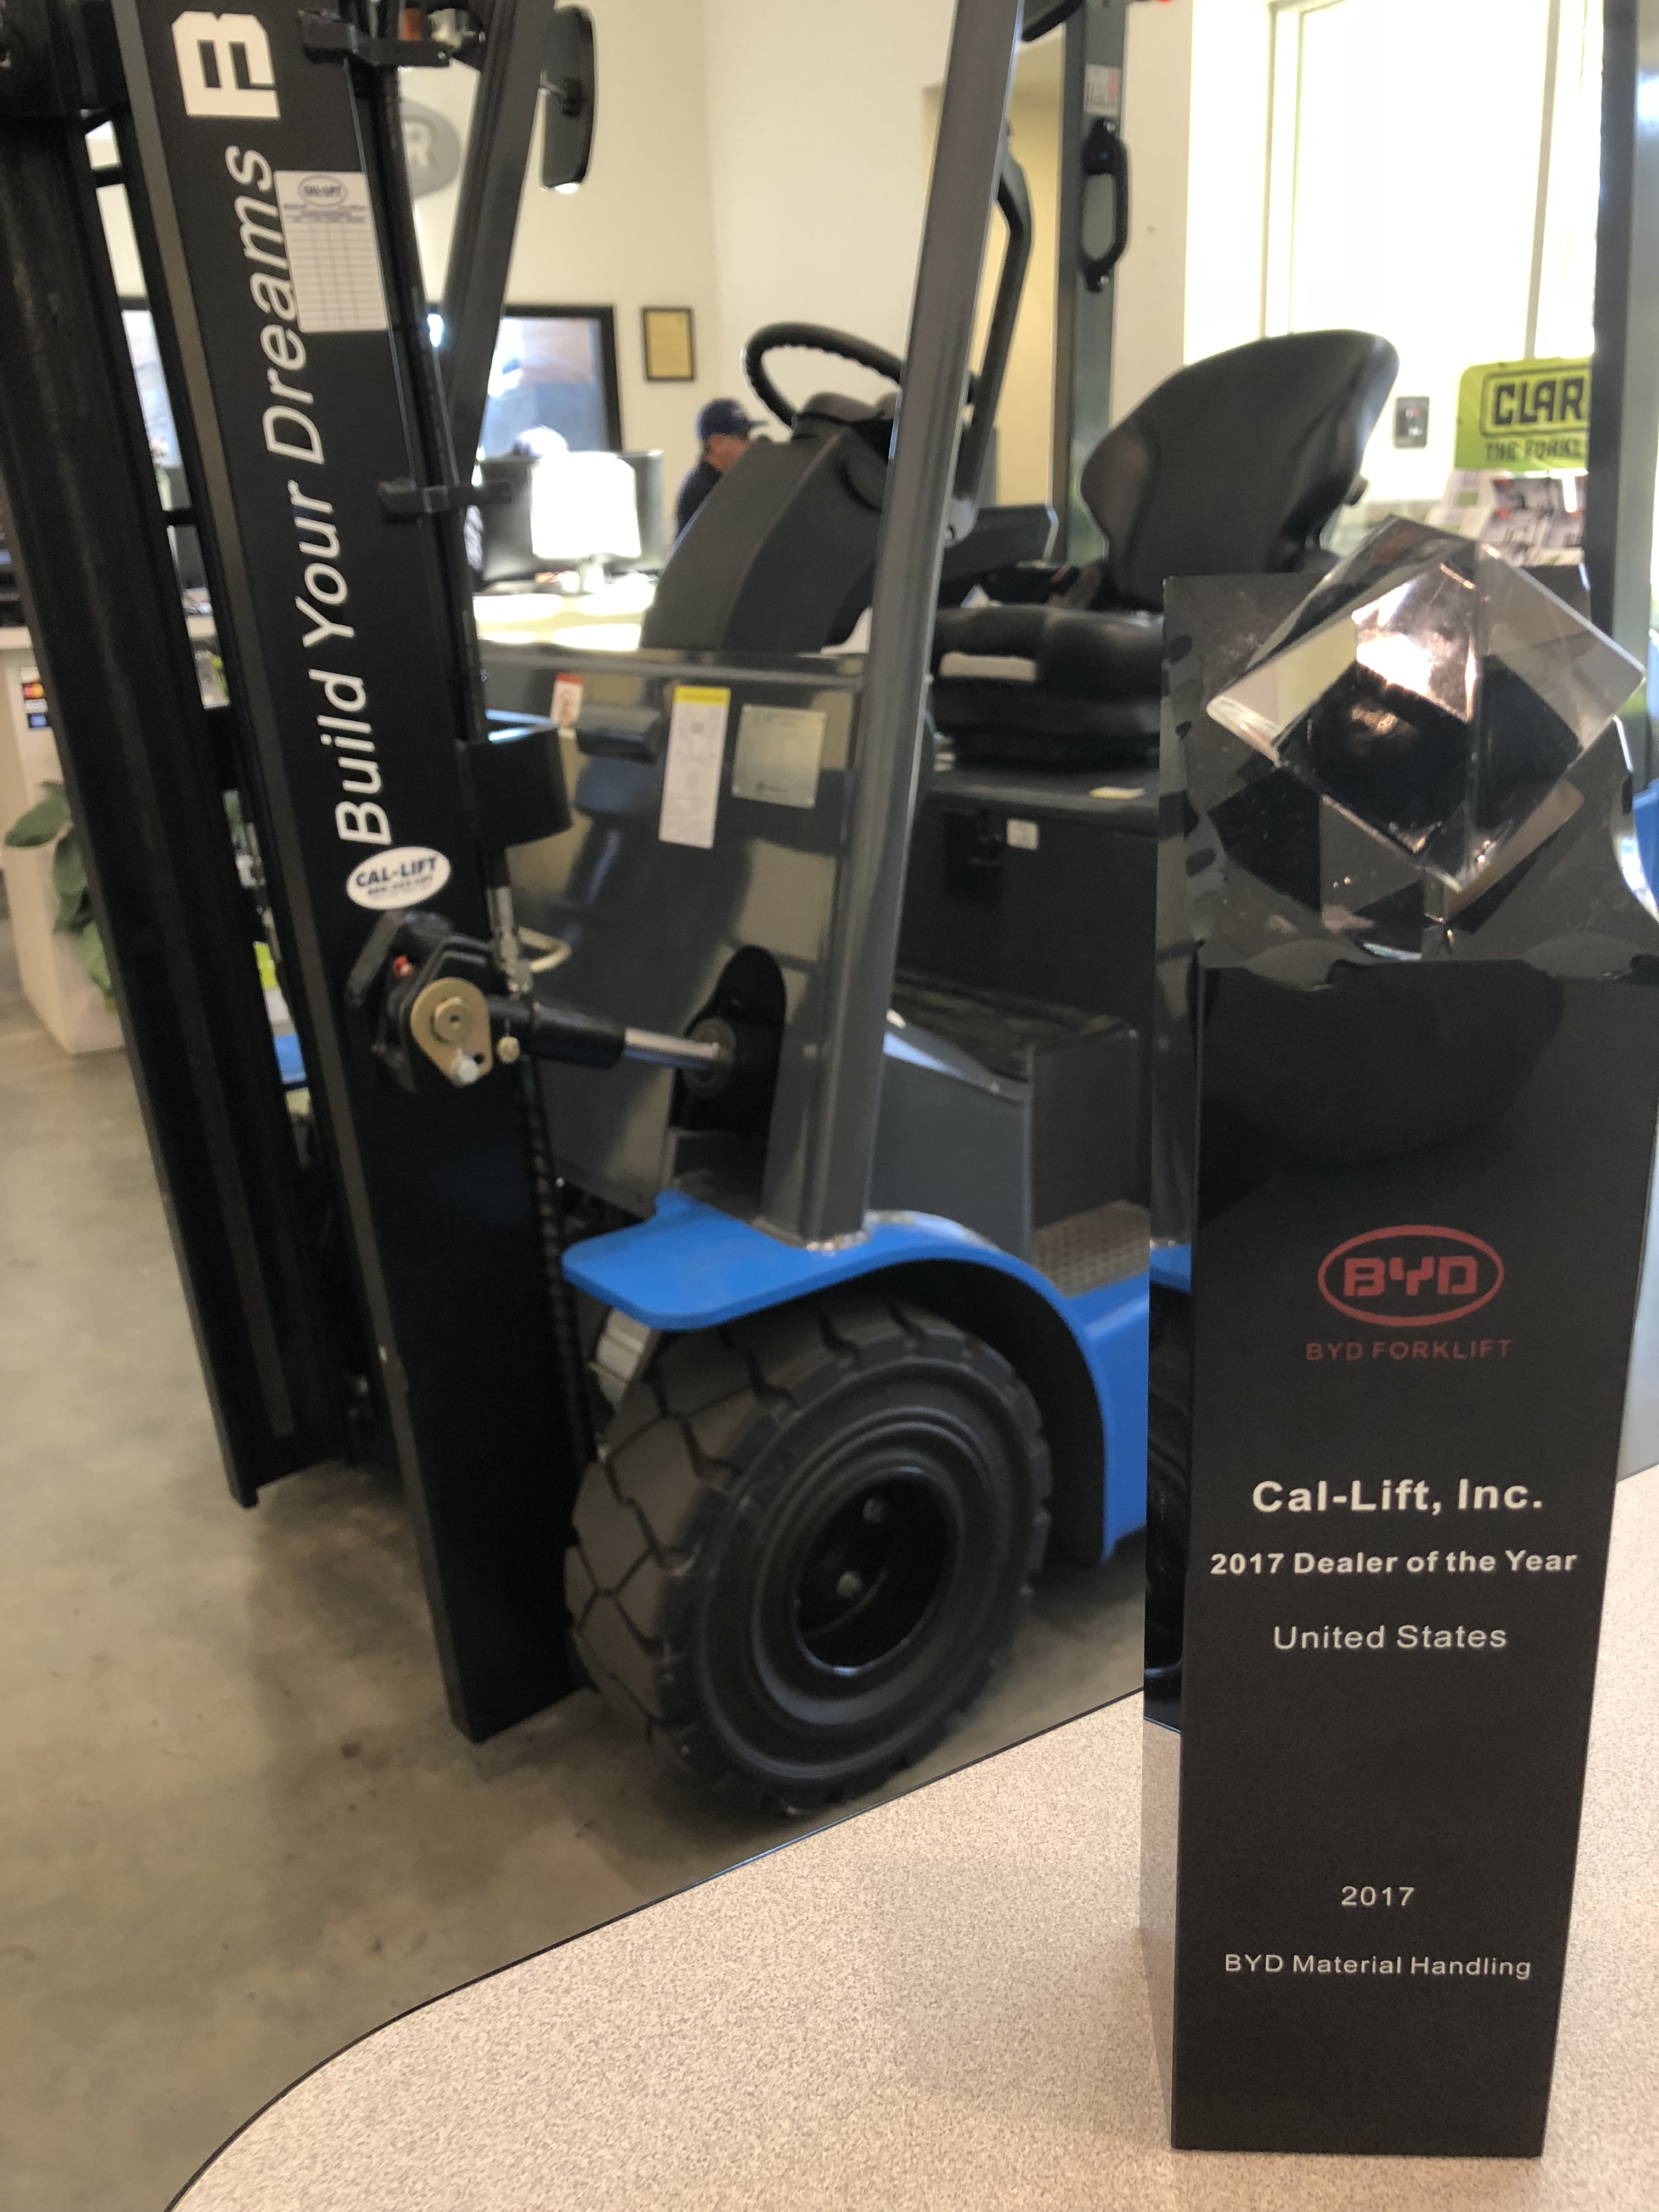 Byd Forklift Cal Lift Los Angeles